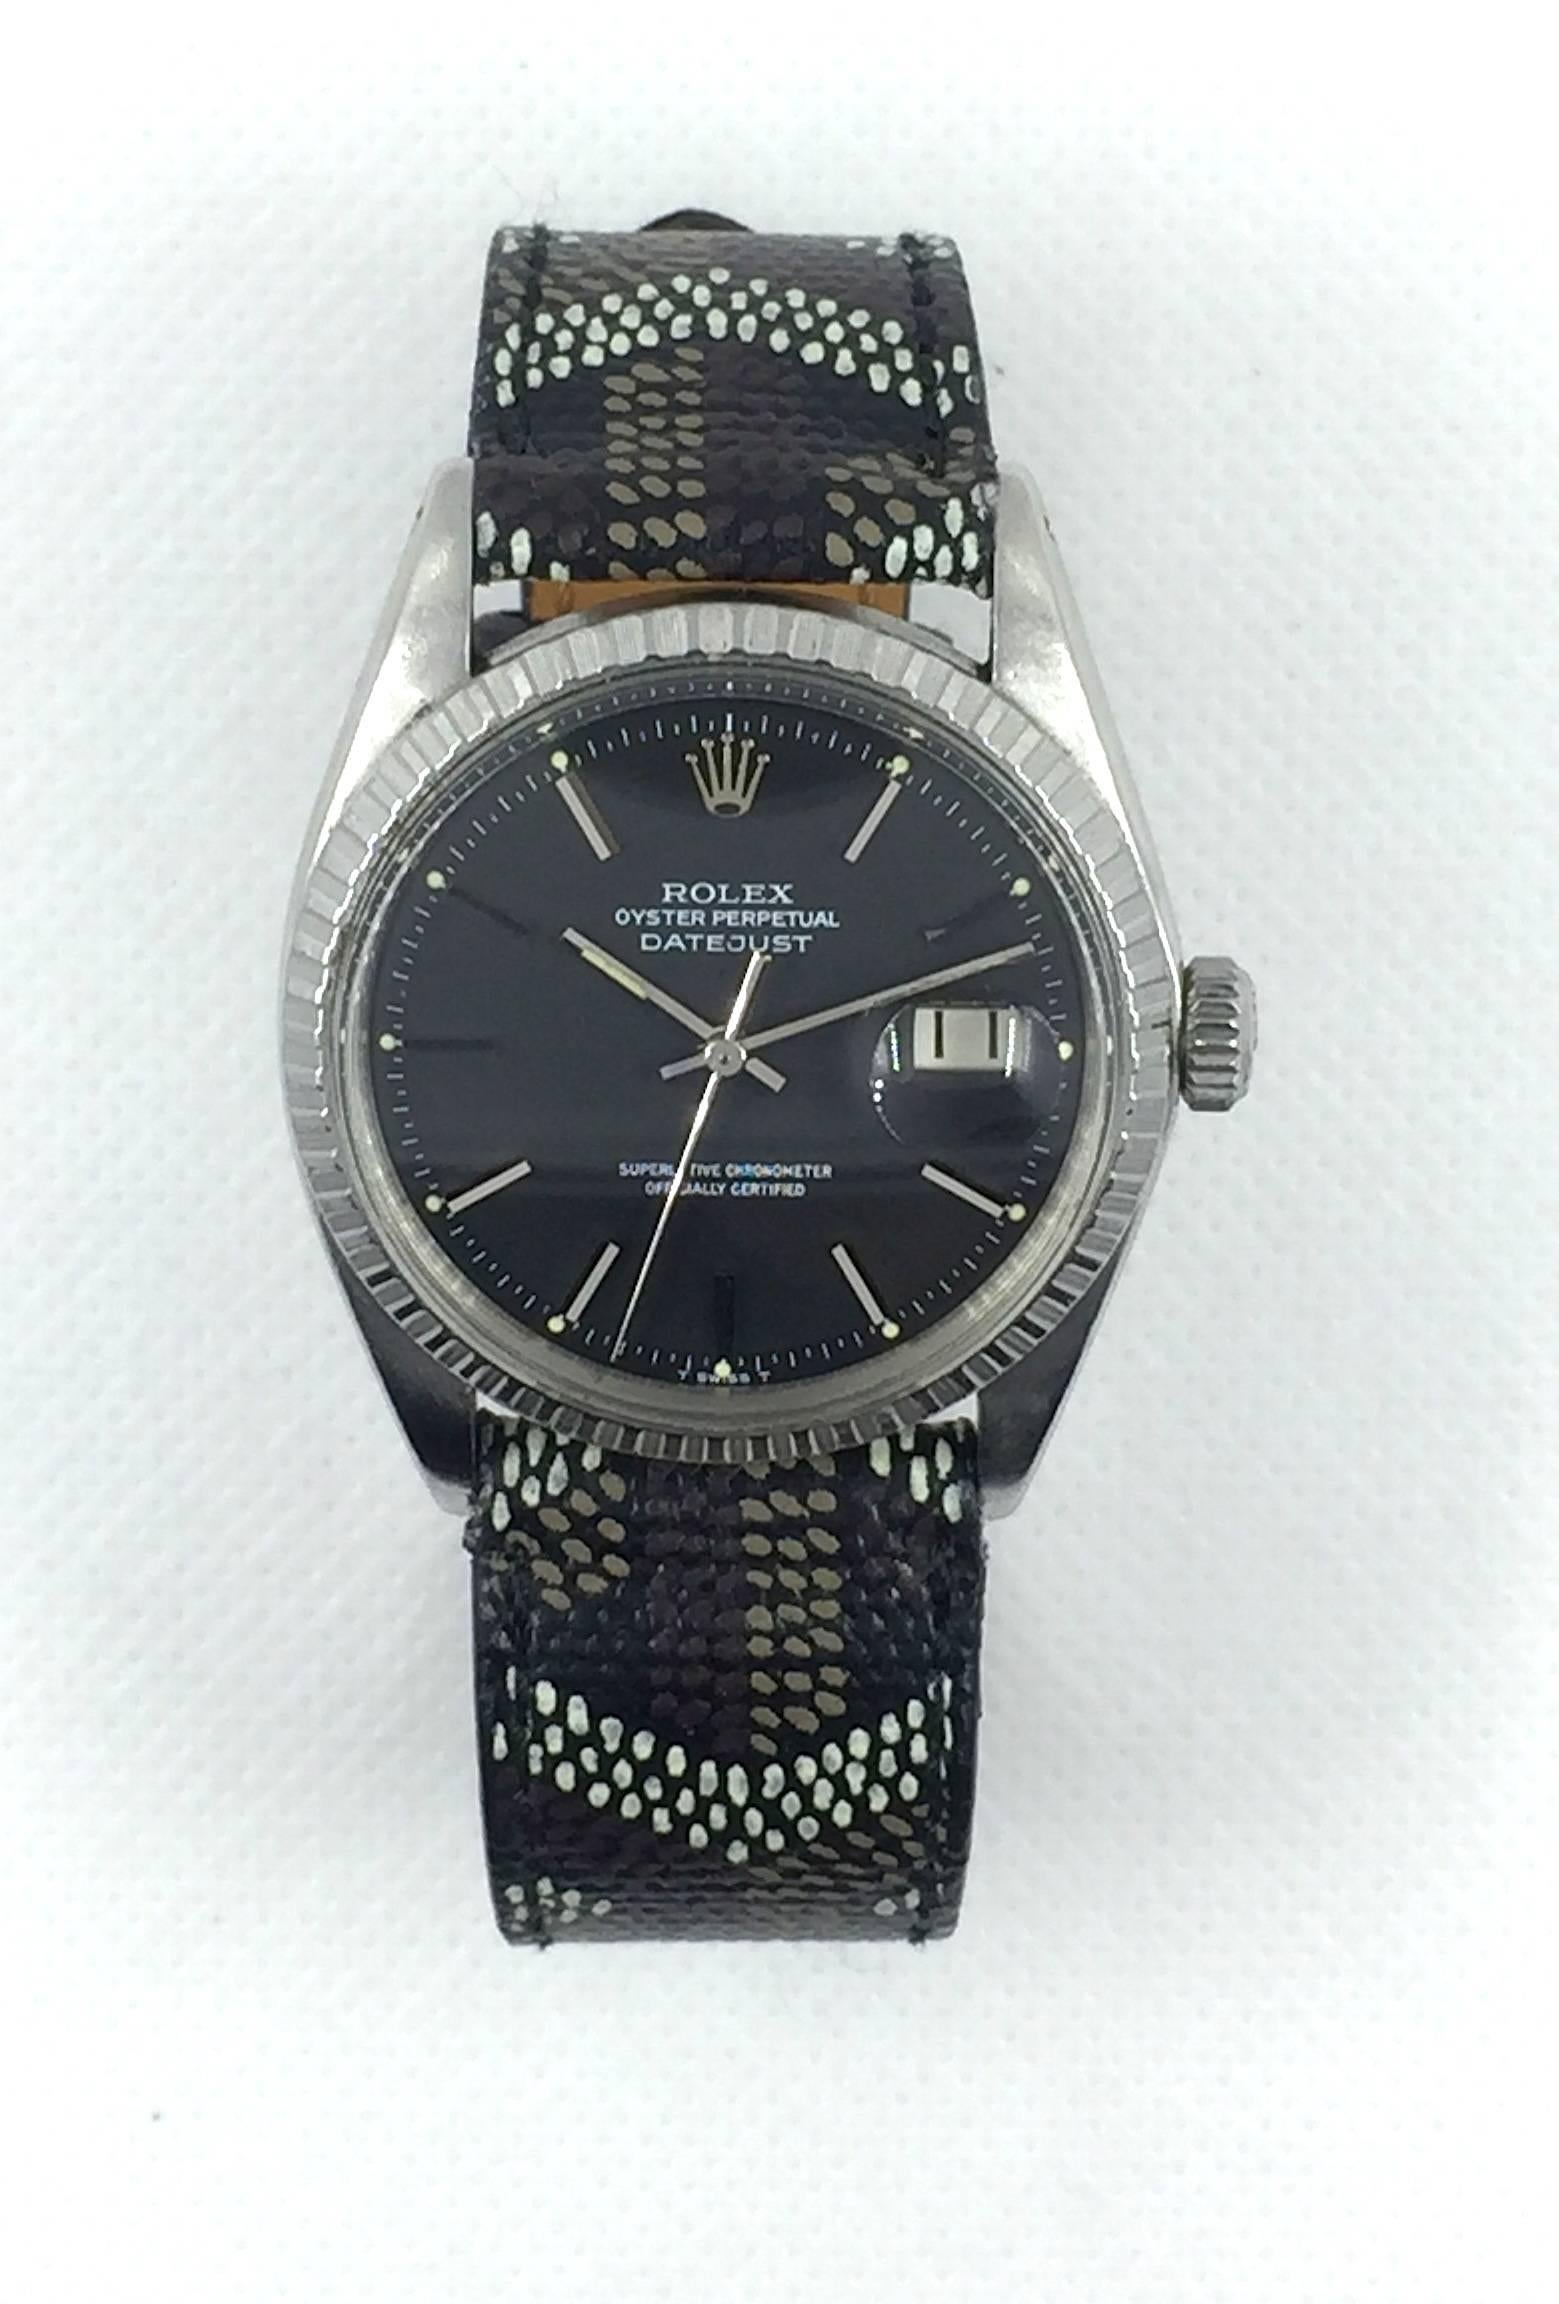 Rolex Stainless Steel Oyster Perpetual Datejust Wristwatch
Factory Black Matte Dial with Silver Applied Hour Markers
Stainless Steel Engine Turned Bezel
36mm in size 
Rolex 1500 Base Calibre Automatic Movement
Acrylic Crystal
Early 1970s